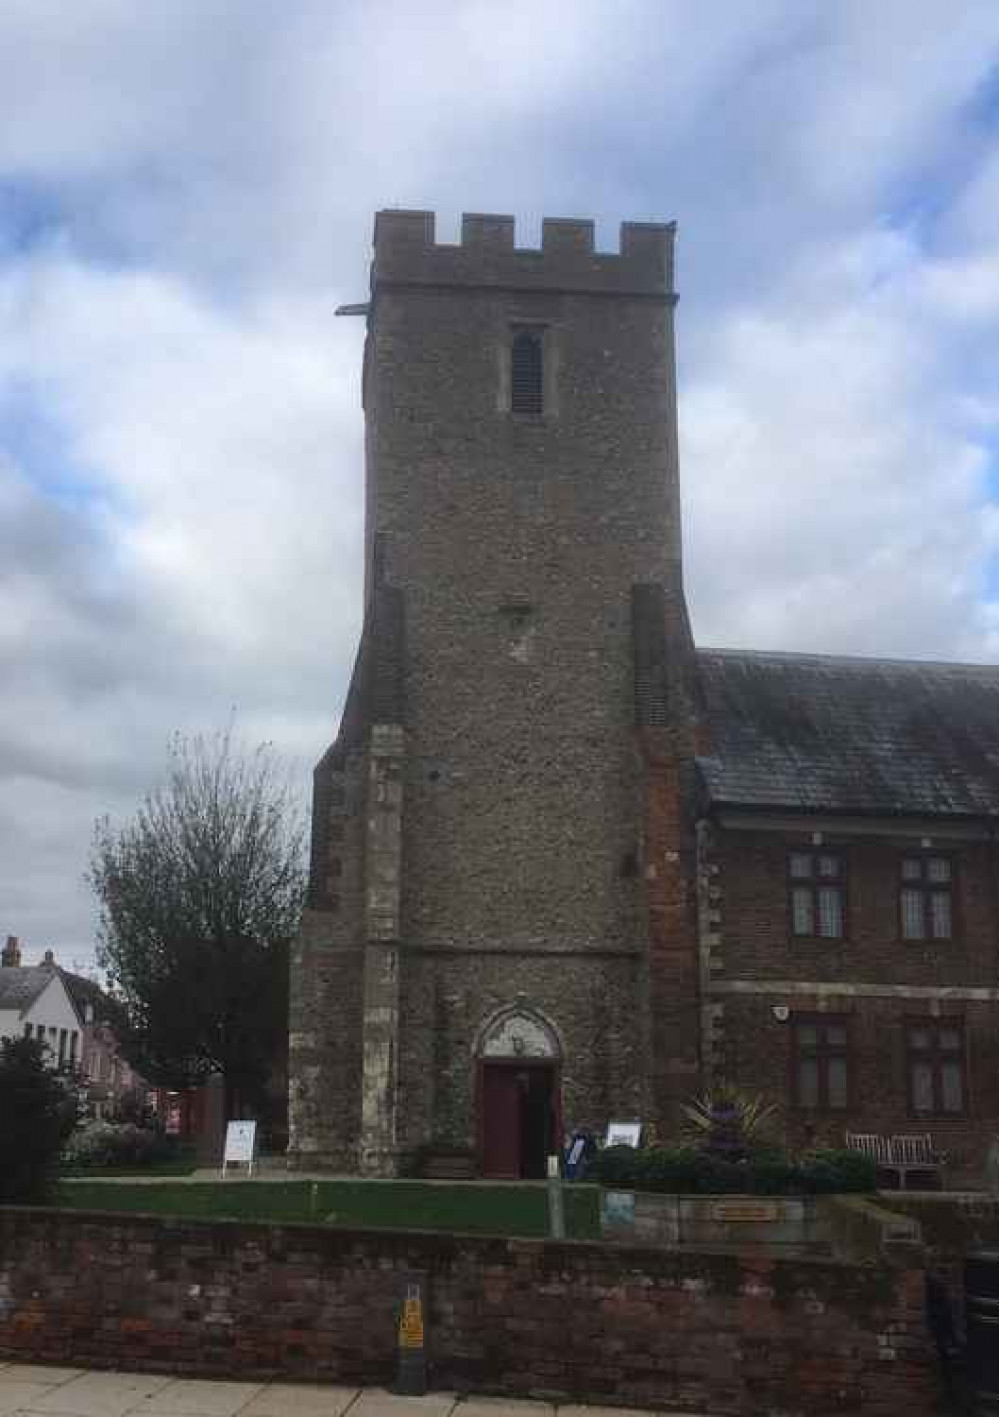 The tower of the medieval church of St Peter in the town centre: Ann married at the church in 1620